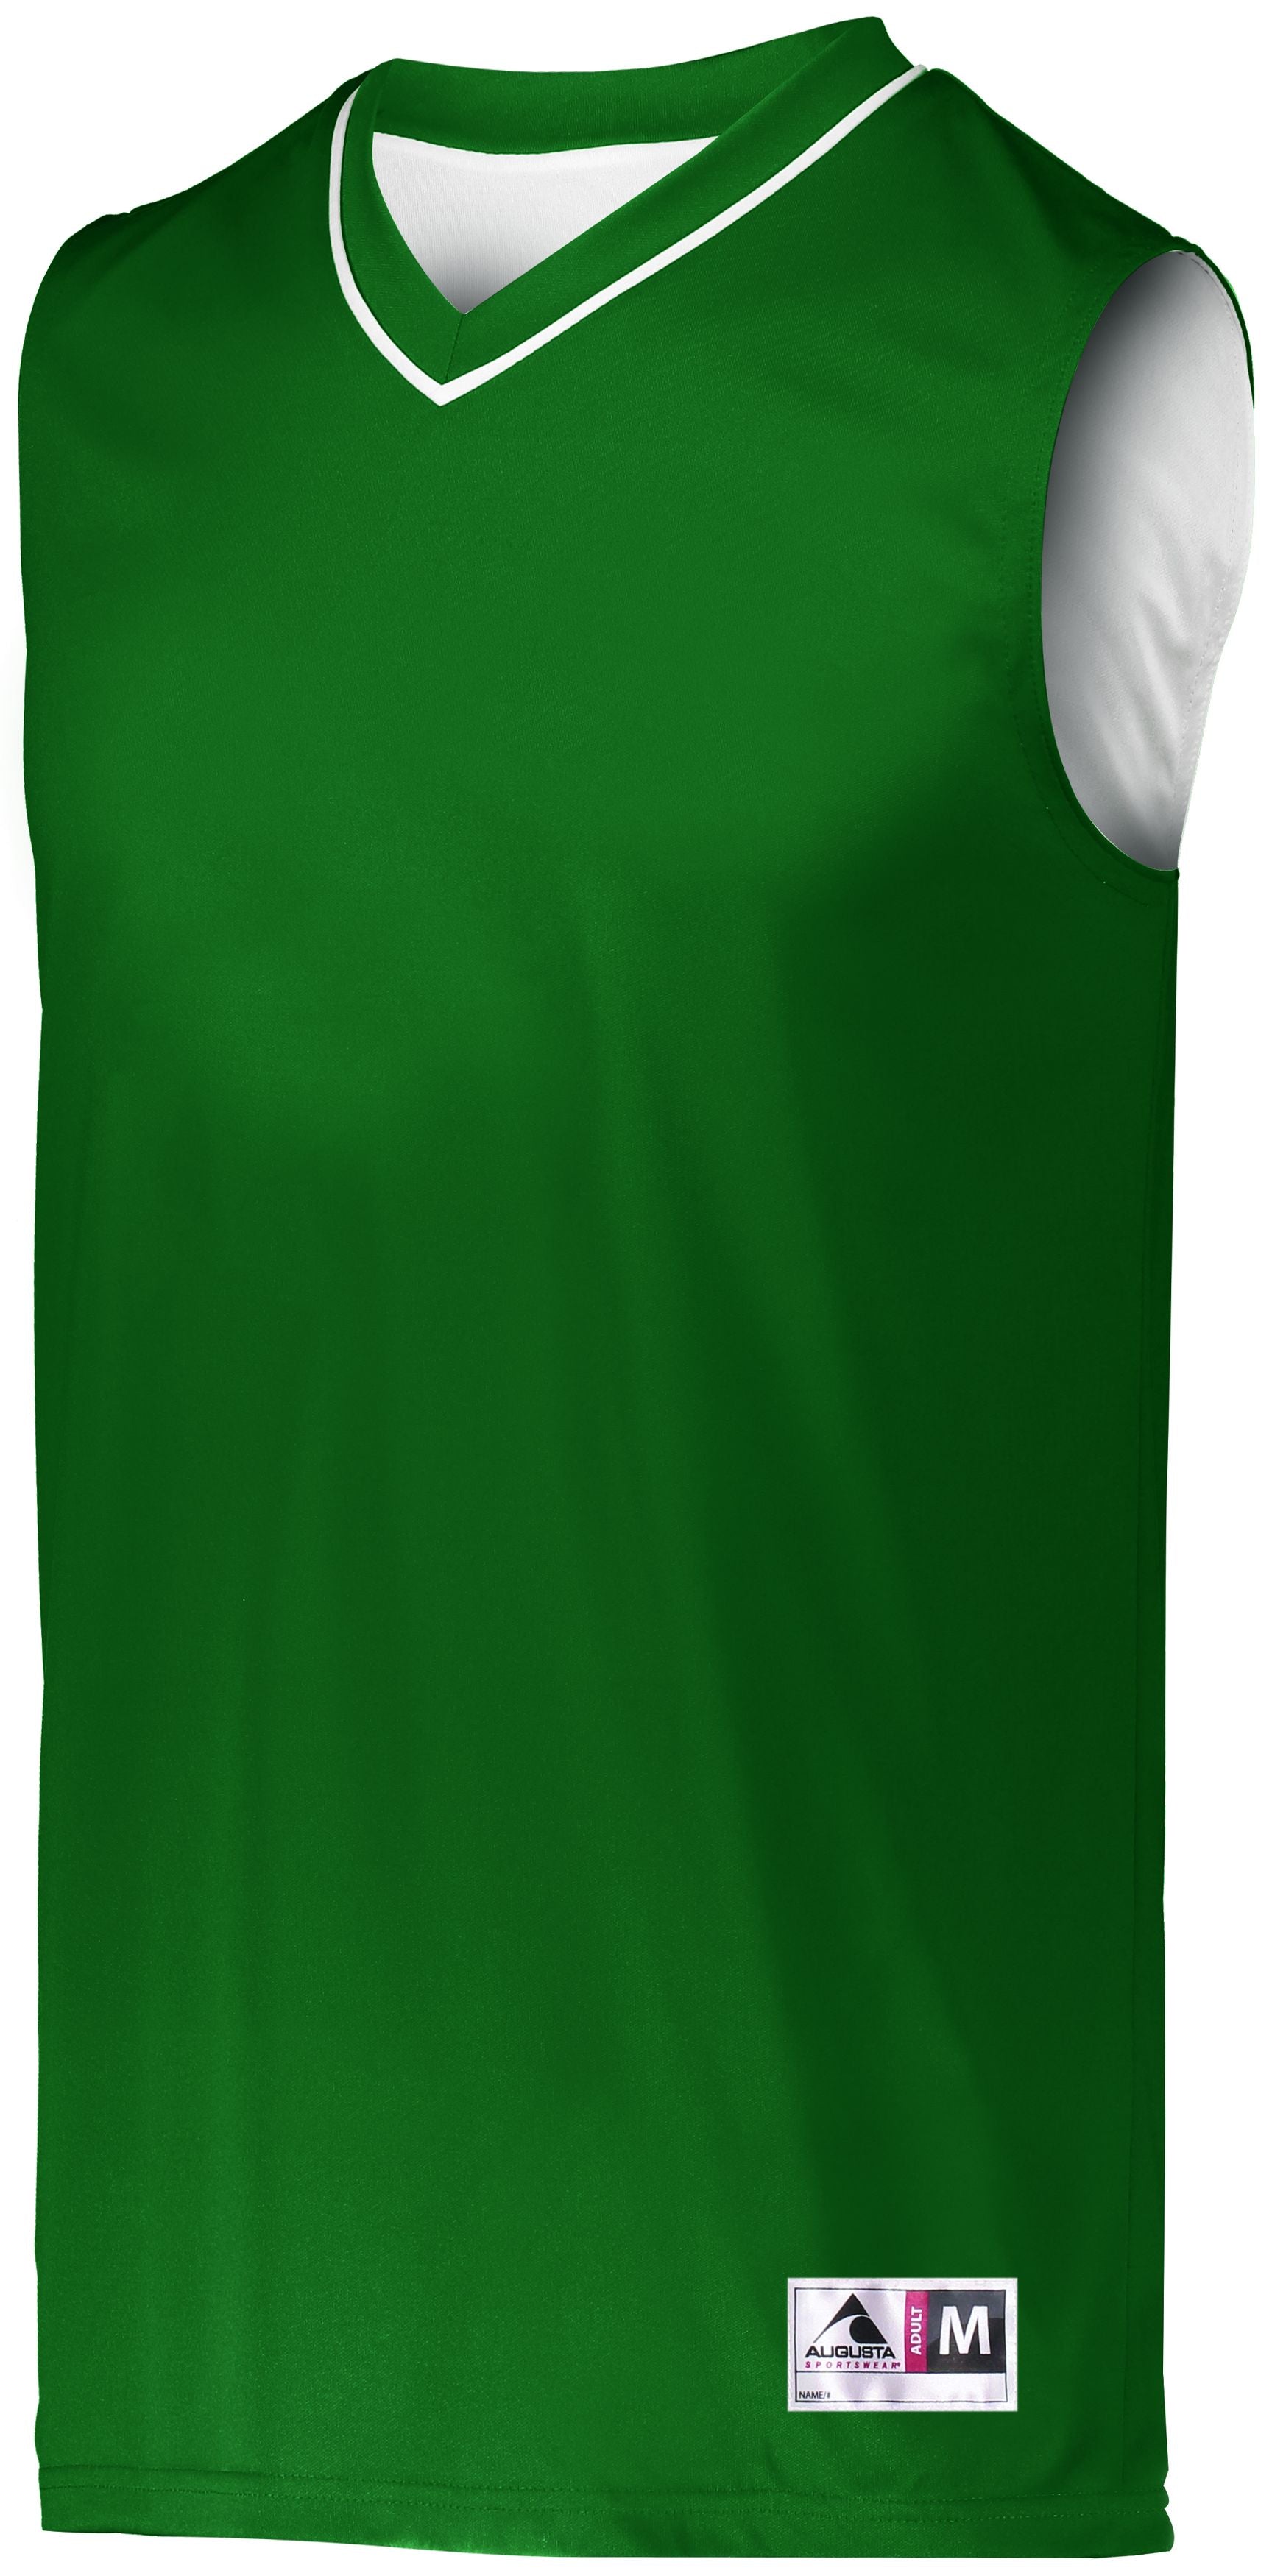 Augusta Sportswear Reversible Two-Color Jersey in Dark Green/White  -Part of the Adult, Adult-Jersey, Augusta-Products, Basketball, Shirts, All-Sports, All-Sports-1 product lines at KanaleyCreations.com